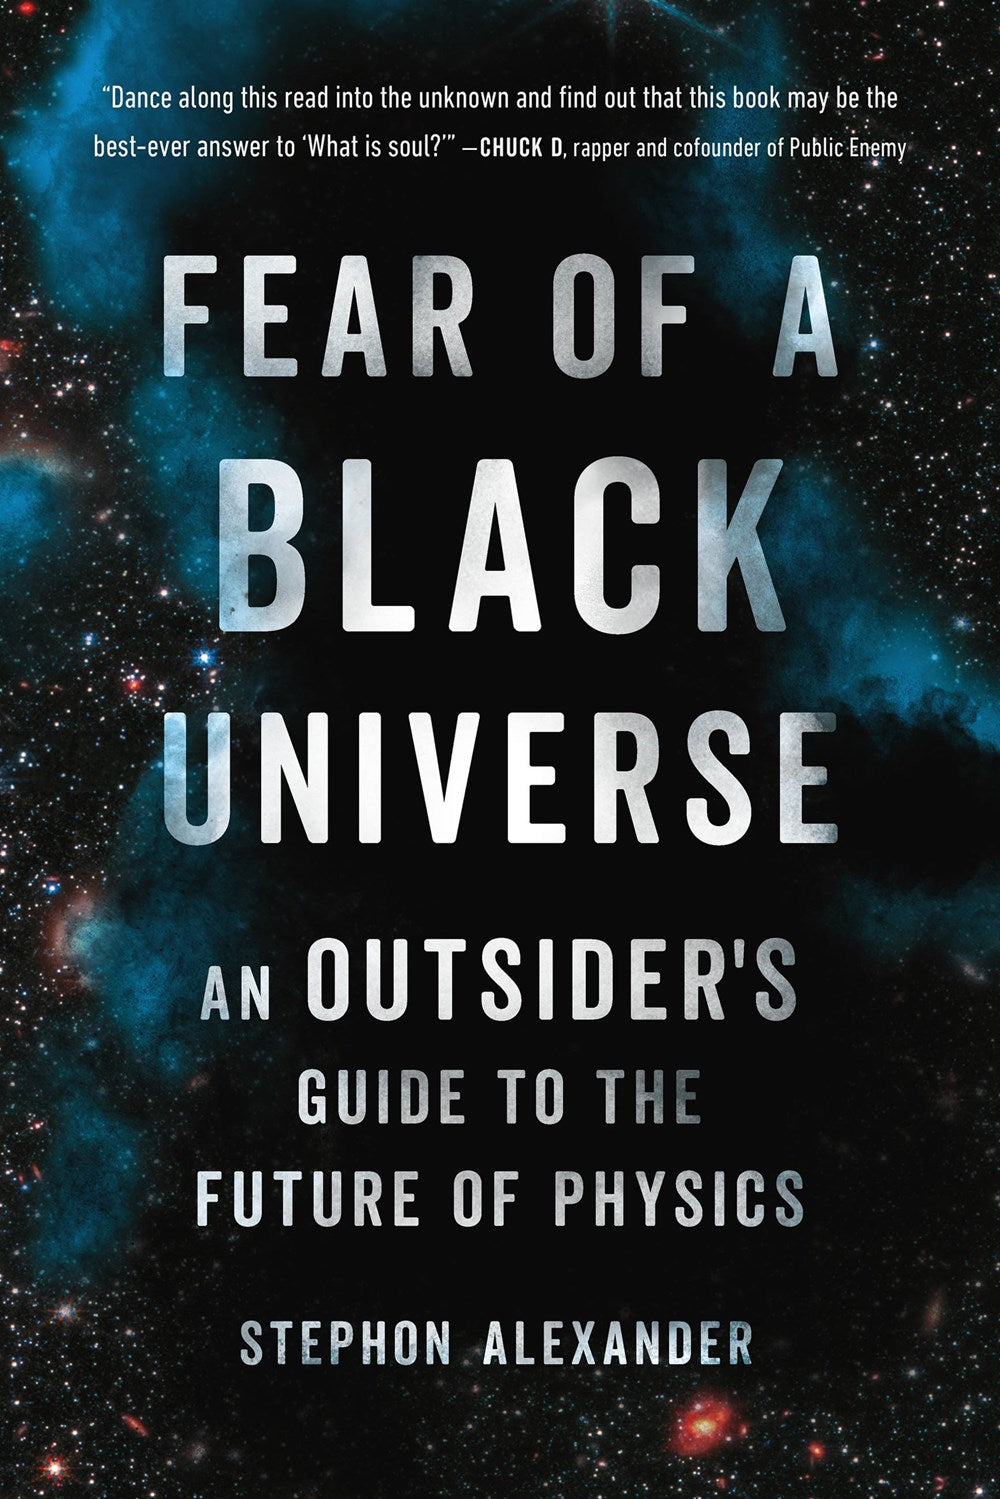 Fear of a Black Universe: An Outsider's Guide to the Future of Physics